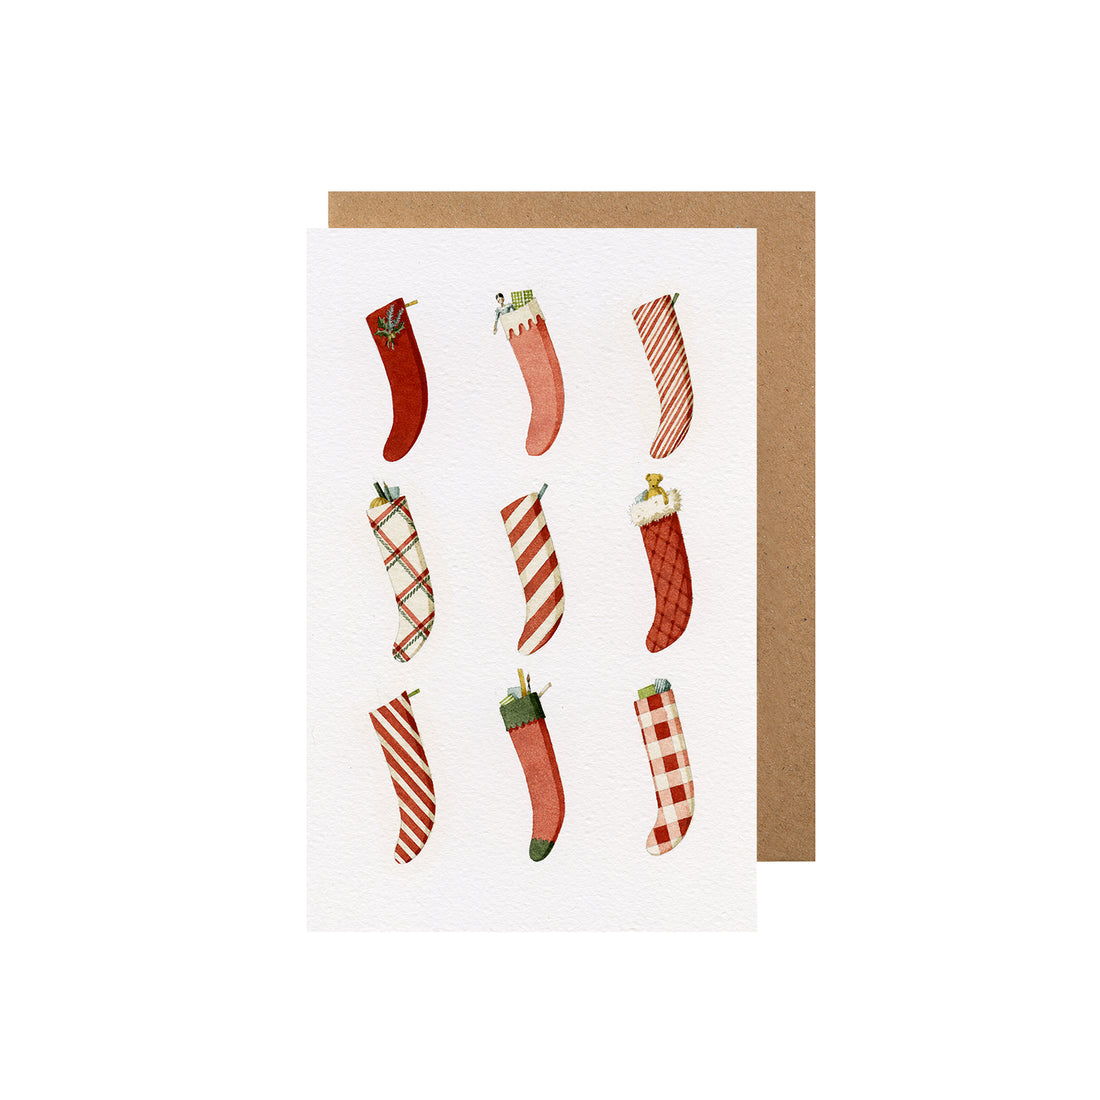 A white card featuring nine illustrated Christmas stockings evenly spaced in three rows, with included kraft paper envelope.